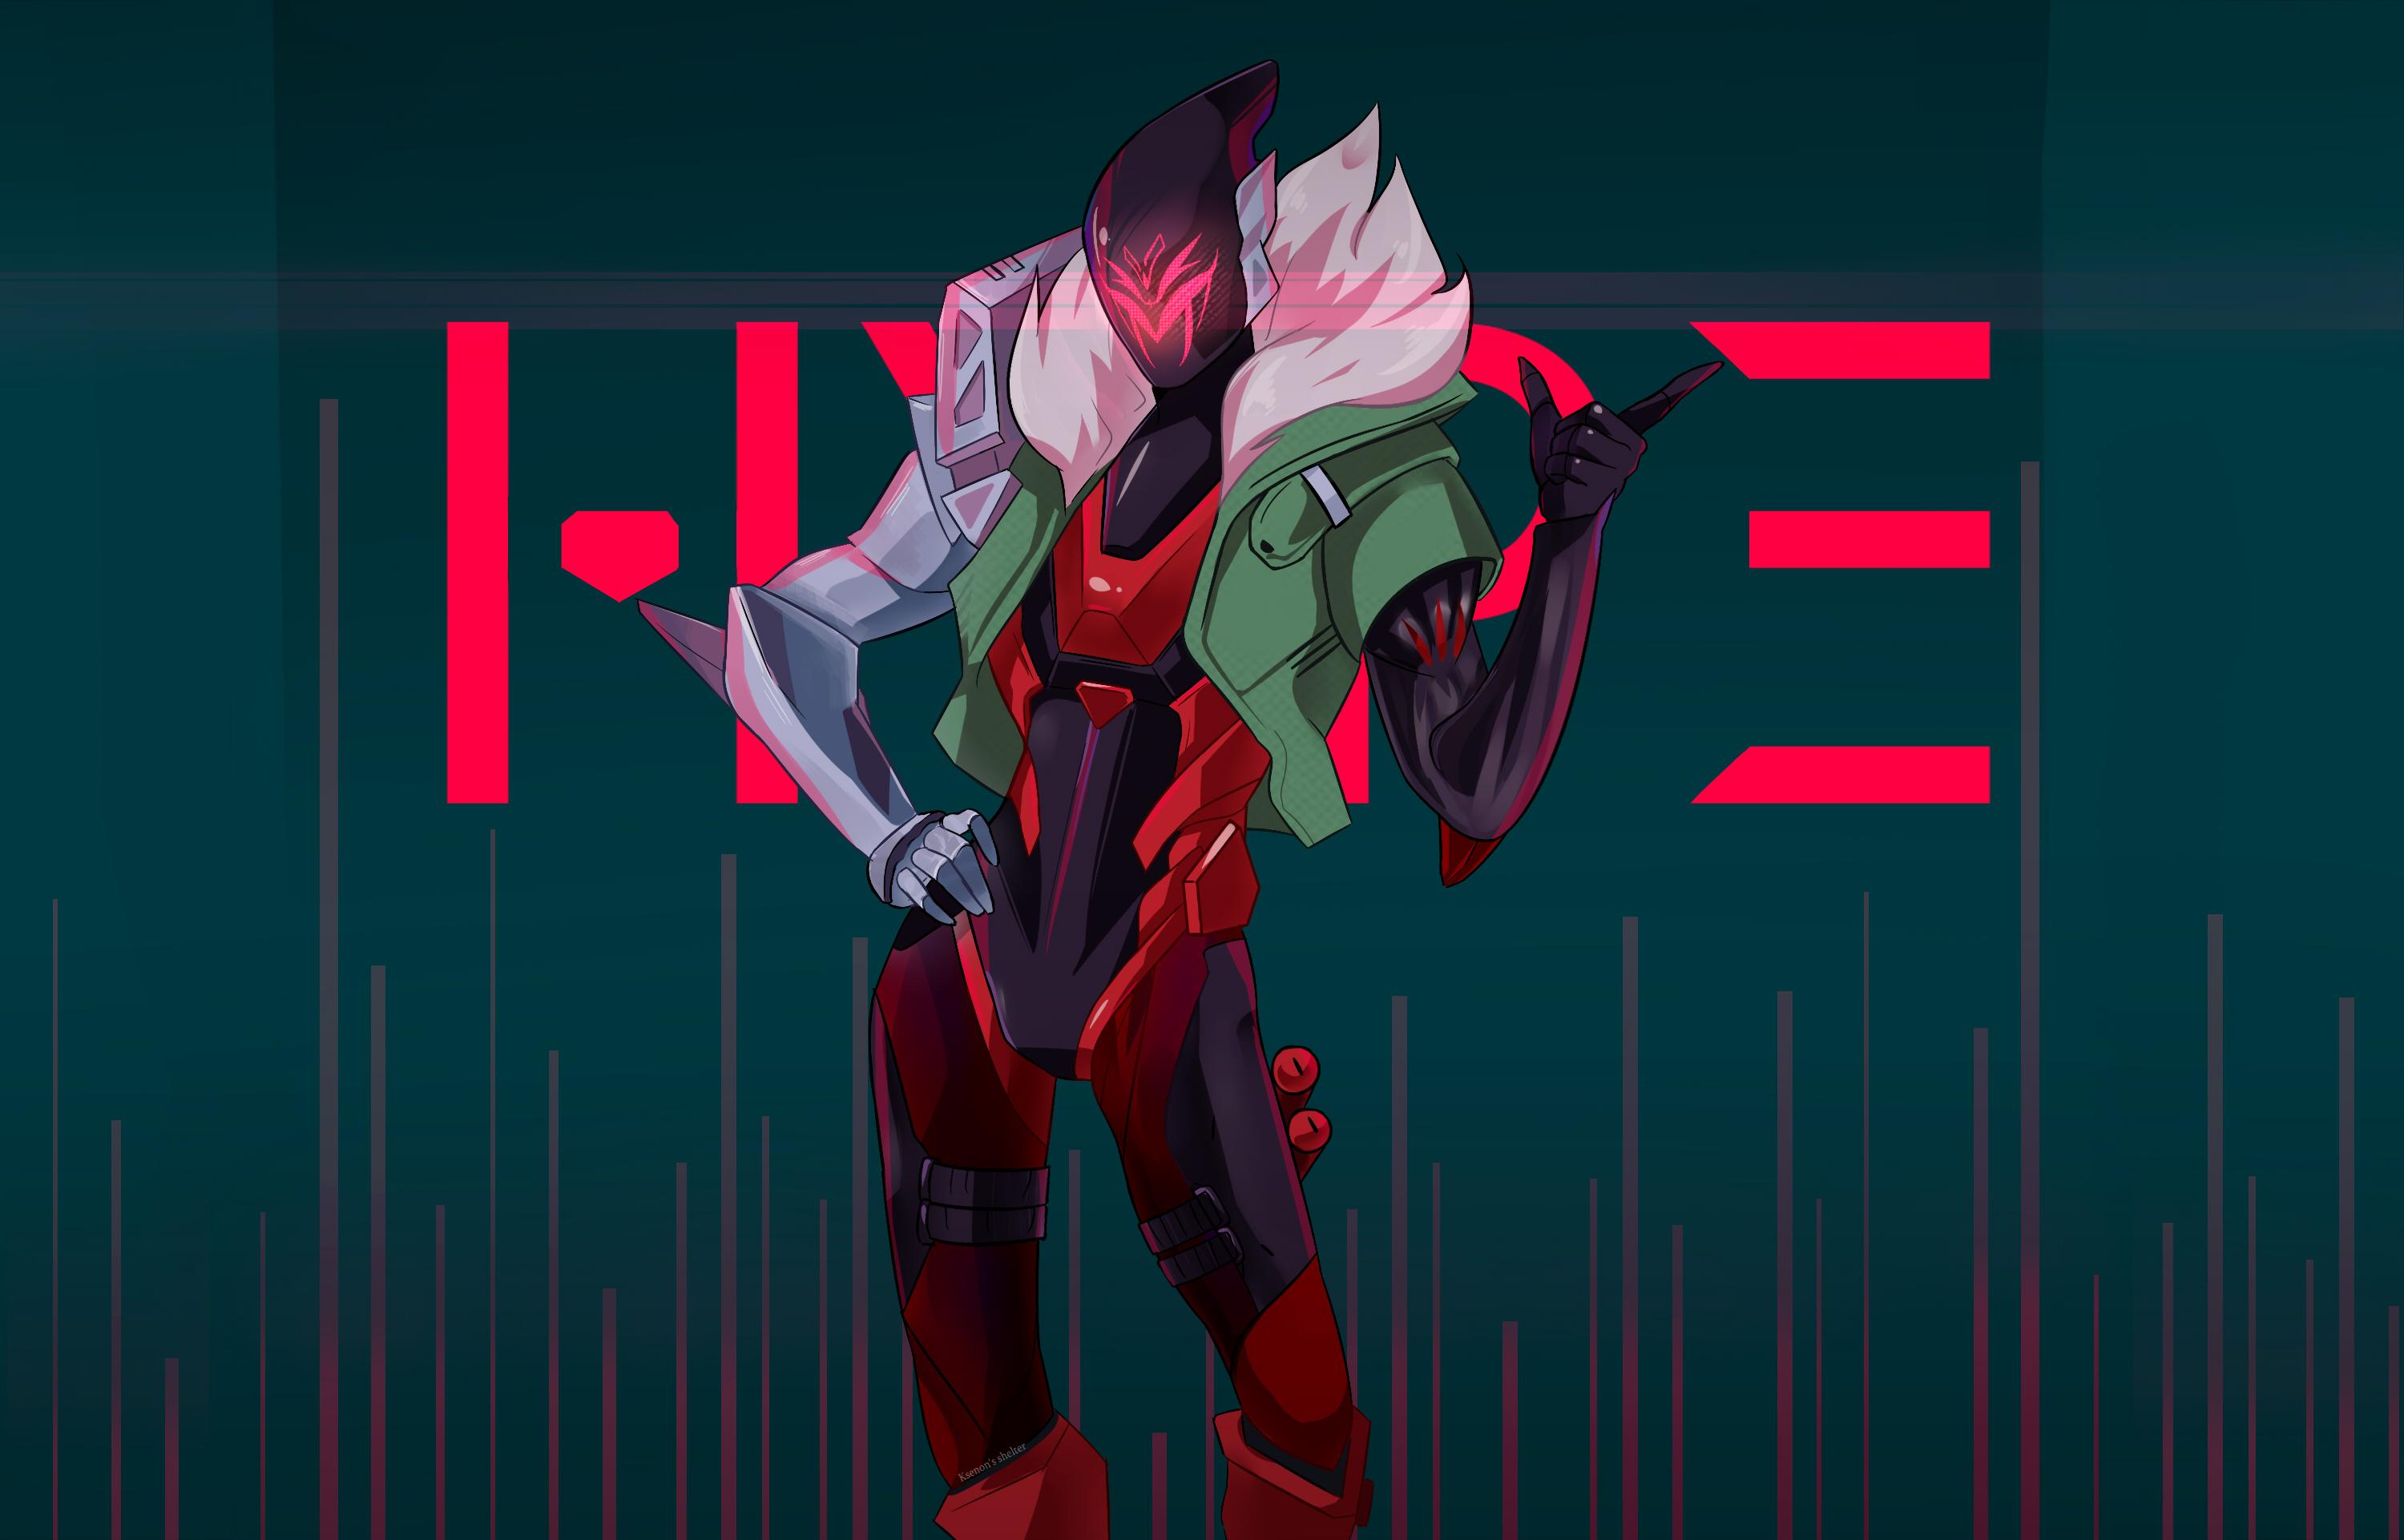 Cool Project Jhin Game Art by Pilotme Wallpapers and Free.